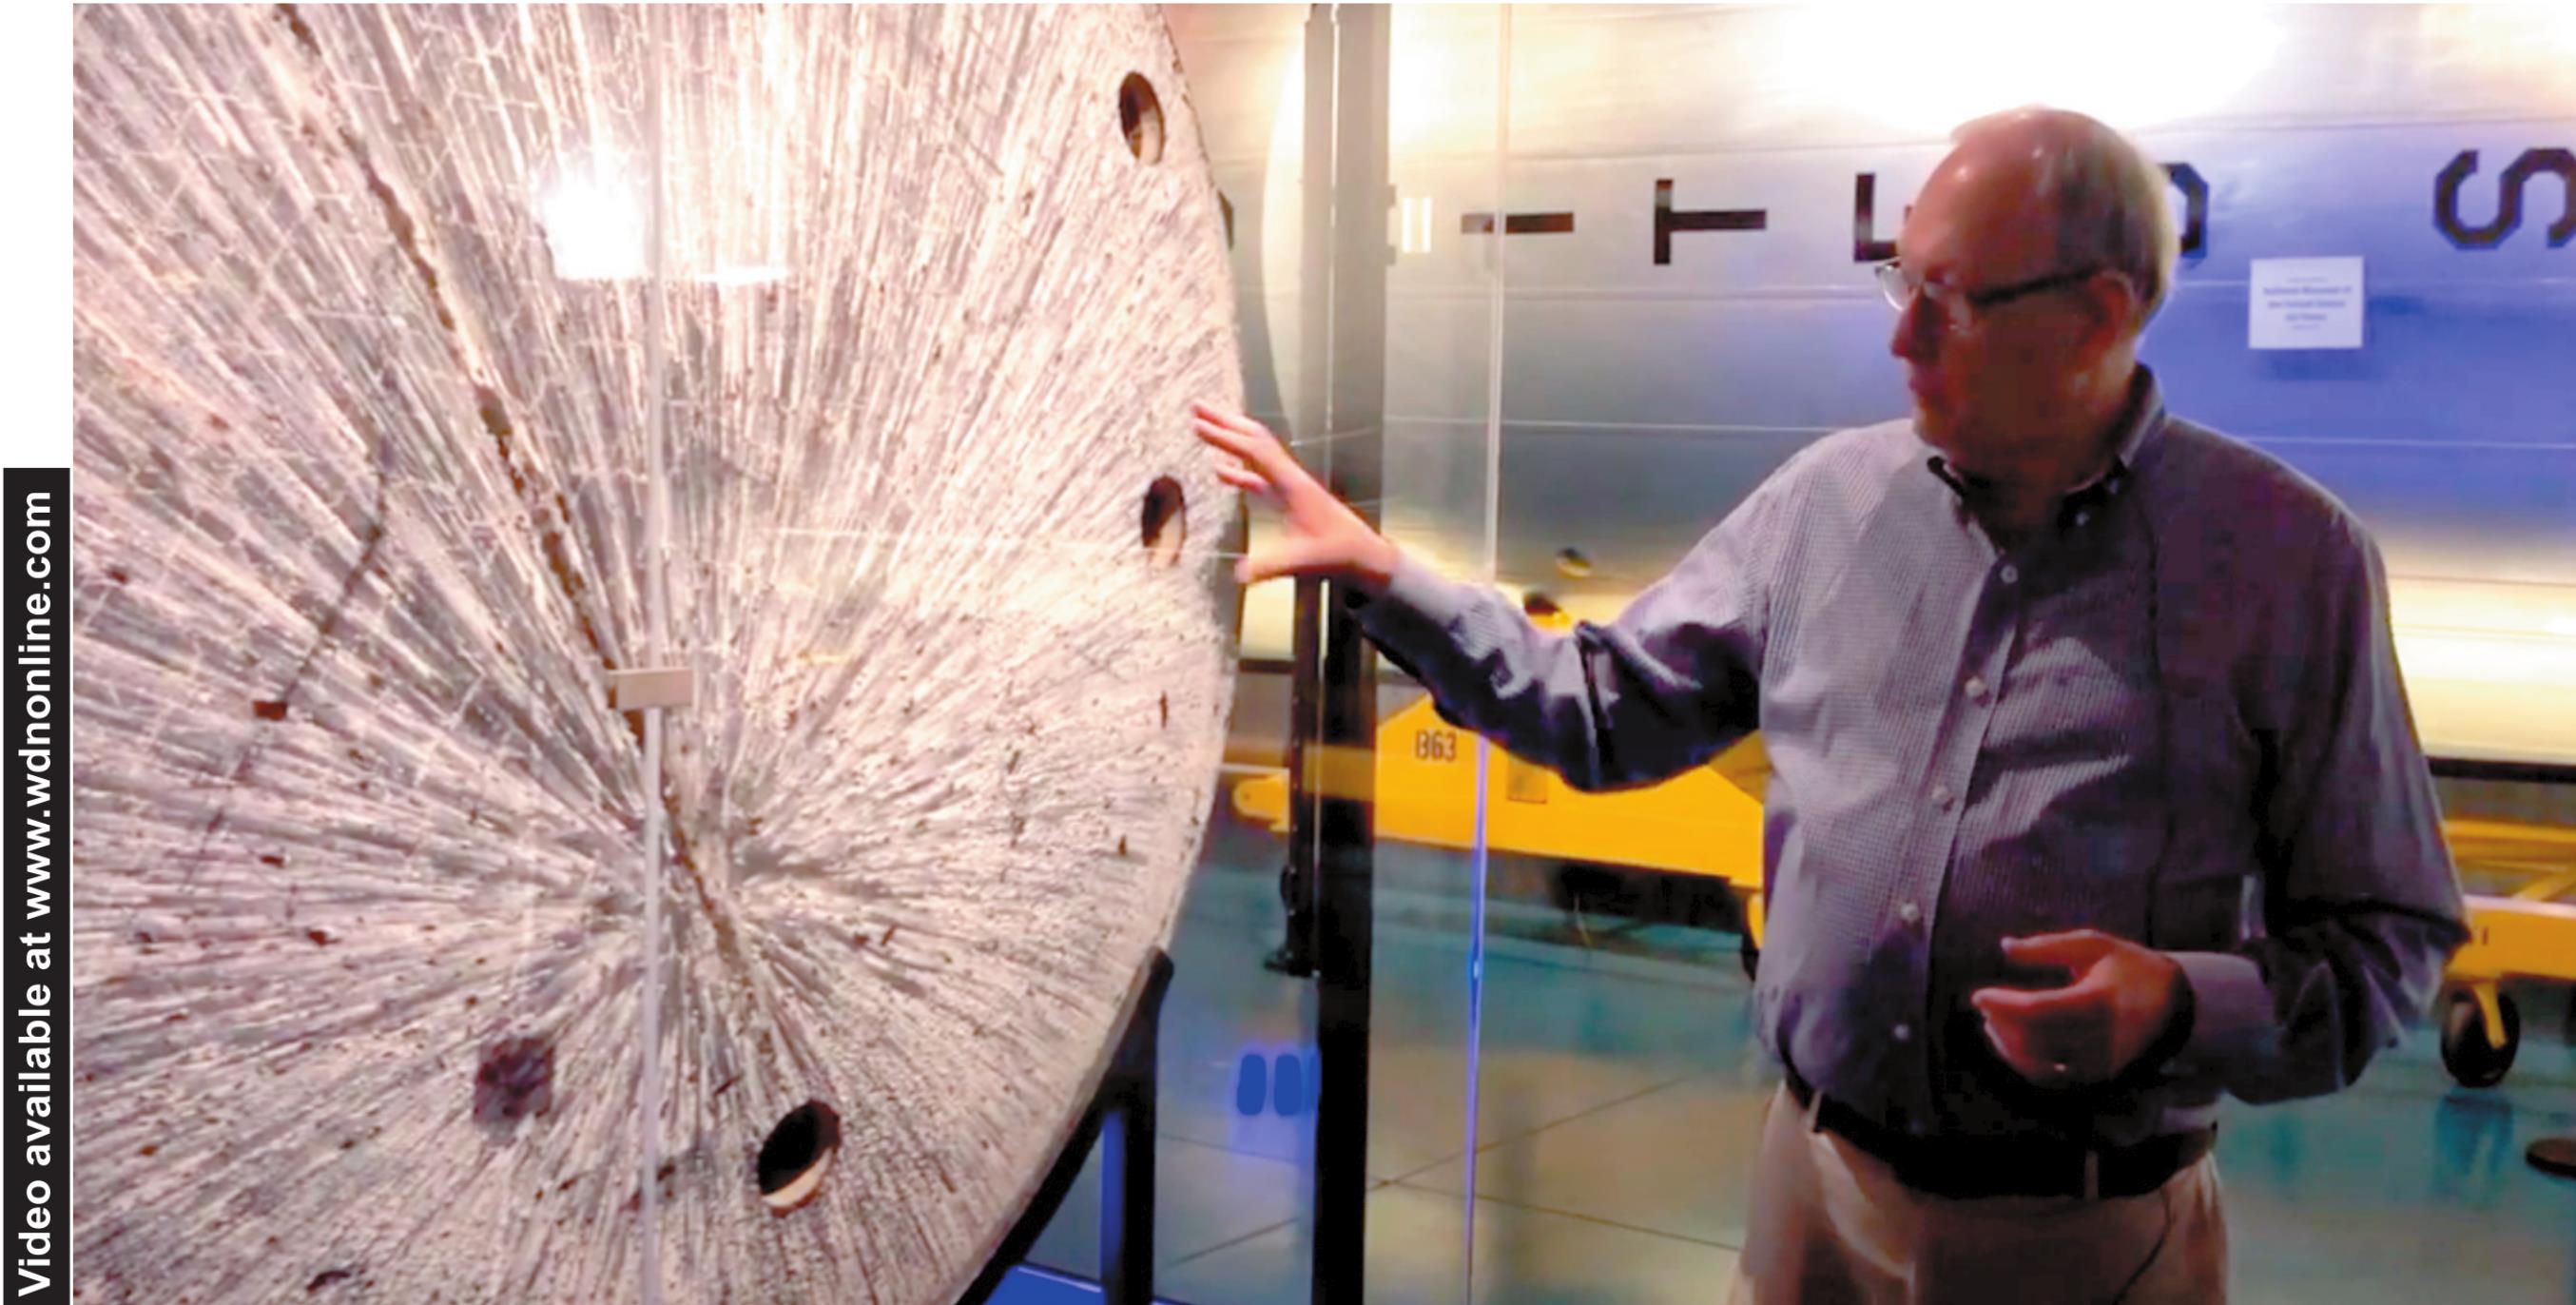 Pictured left is a part of the Gemini 6 spacecraft. Stafford Air &amp; Space Museum Director, Max Ary, talked about the stress on the heat shields as the craft re-entered the atomsphere, leaving the burn marks on Gemini 6. The full video interview with Ary can be viewed at www.wdnonline.com and on the WDN Facebook.Provided